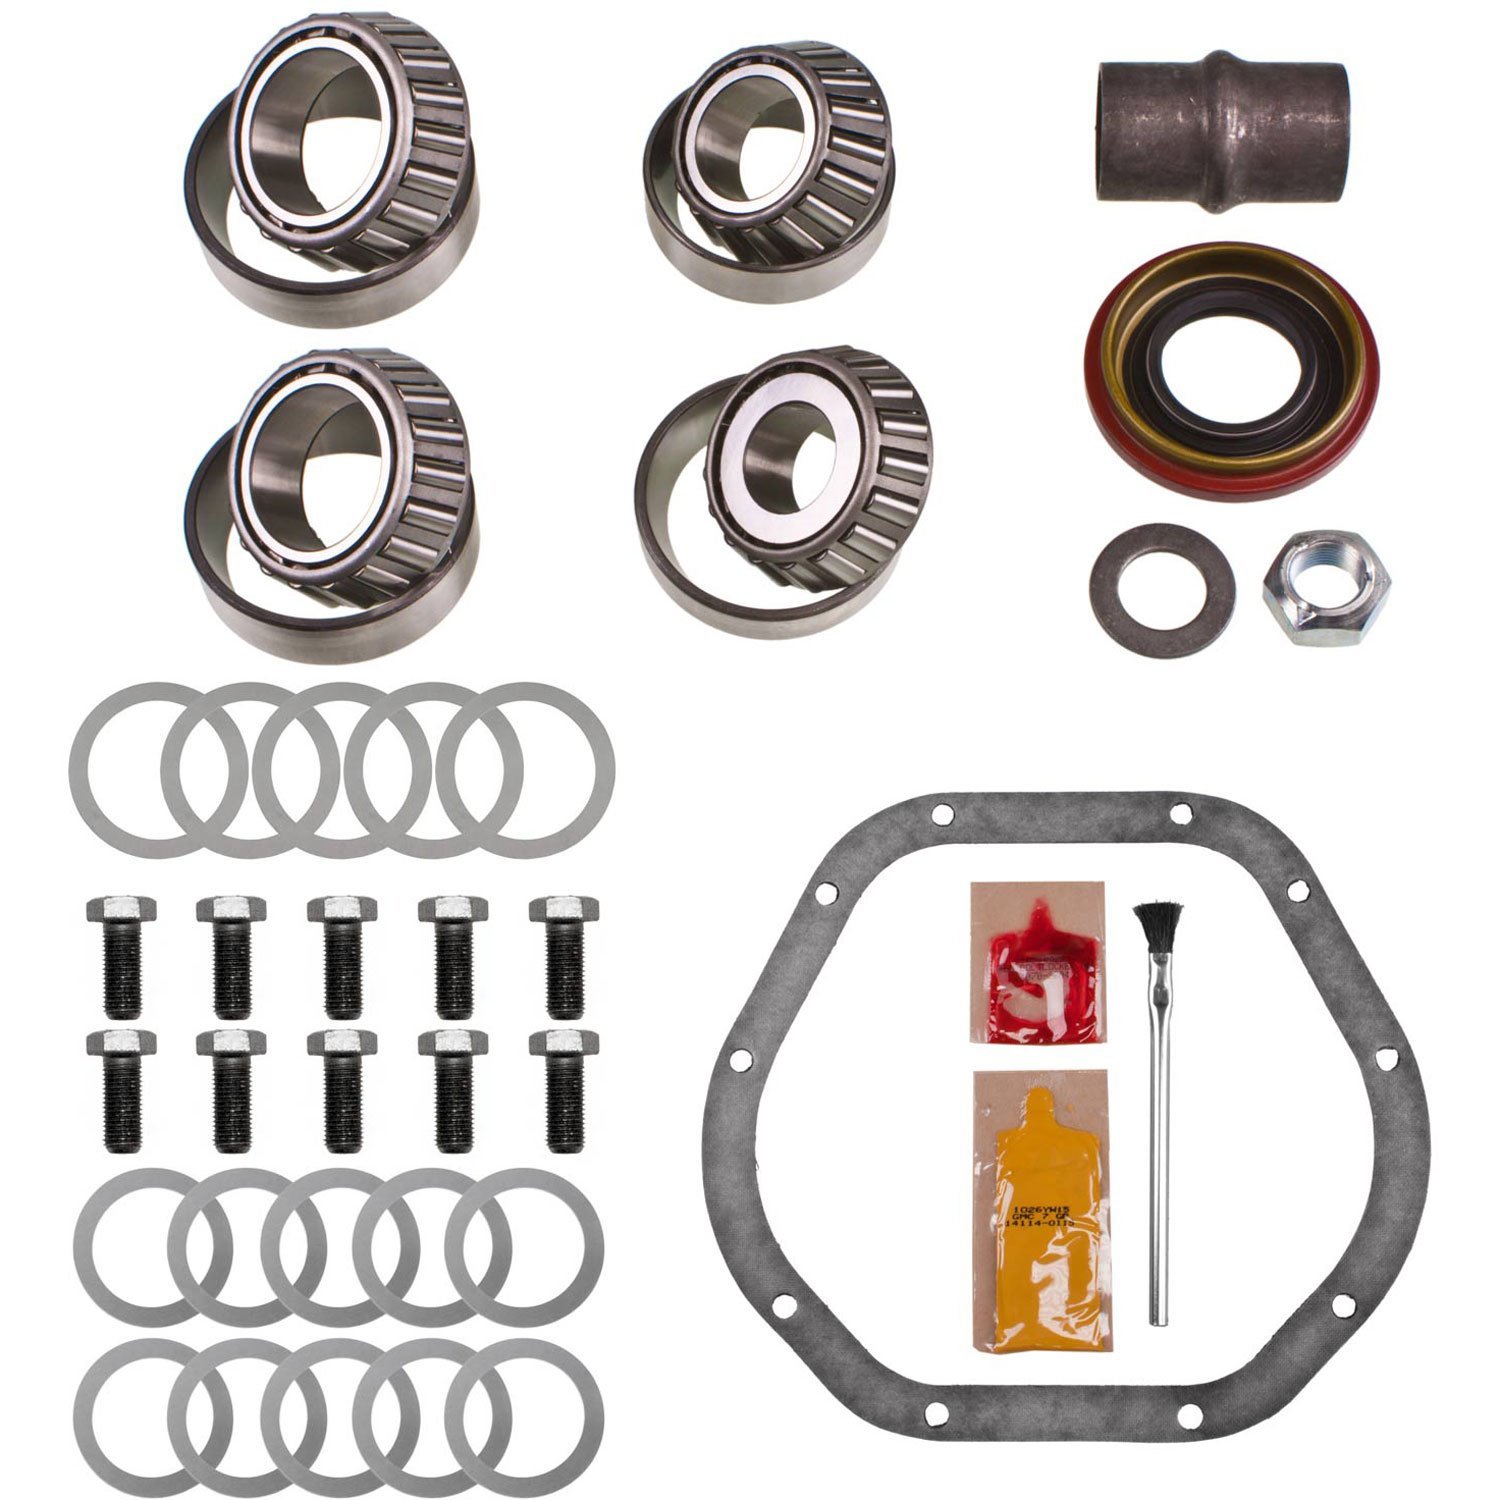 Differential Master Bearing Kit for Ford, Dodge Trucks, SUVs w/Dana 44 Front, Rear Axle [Timken Bearings]